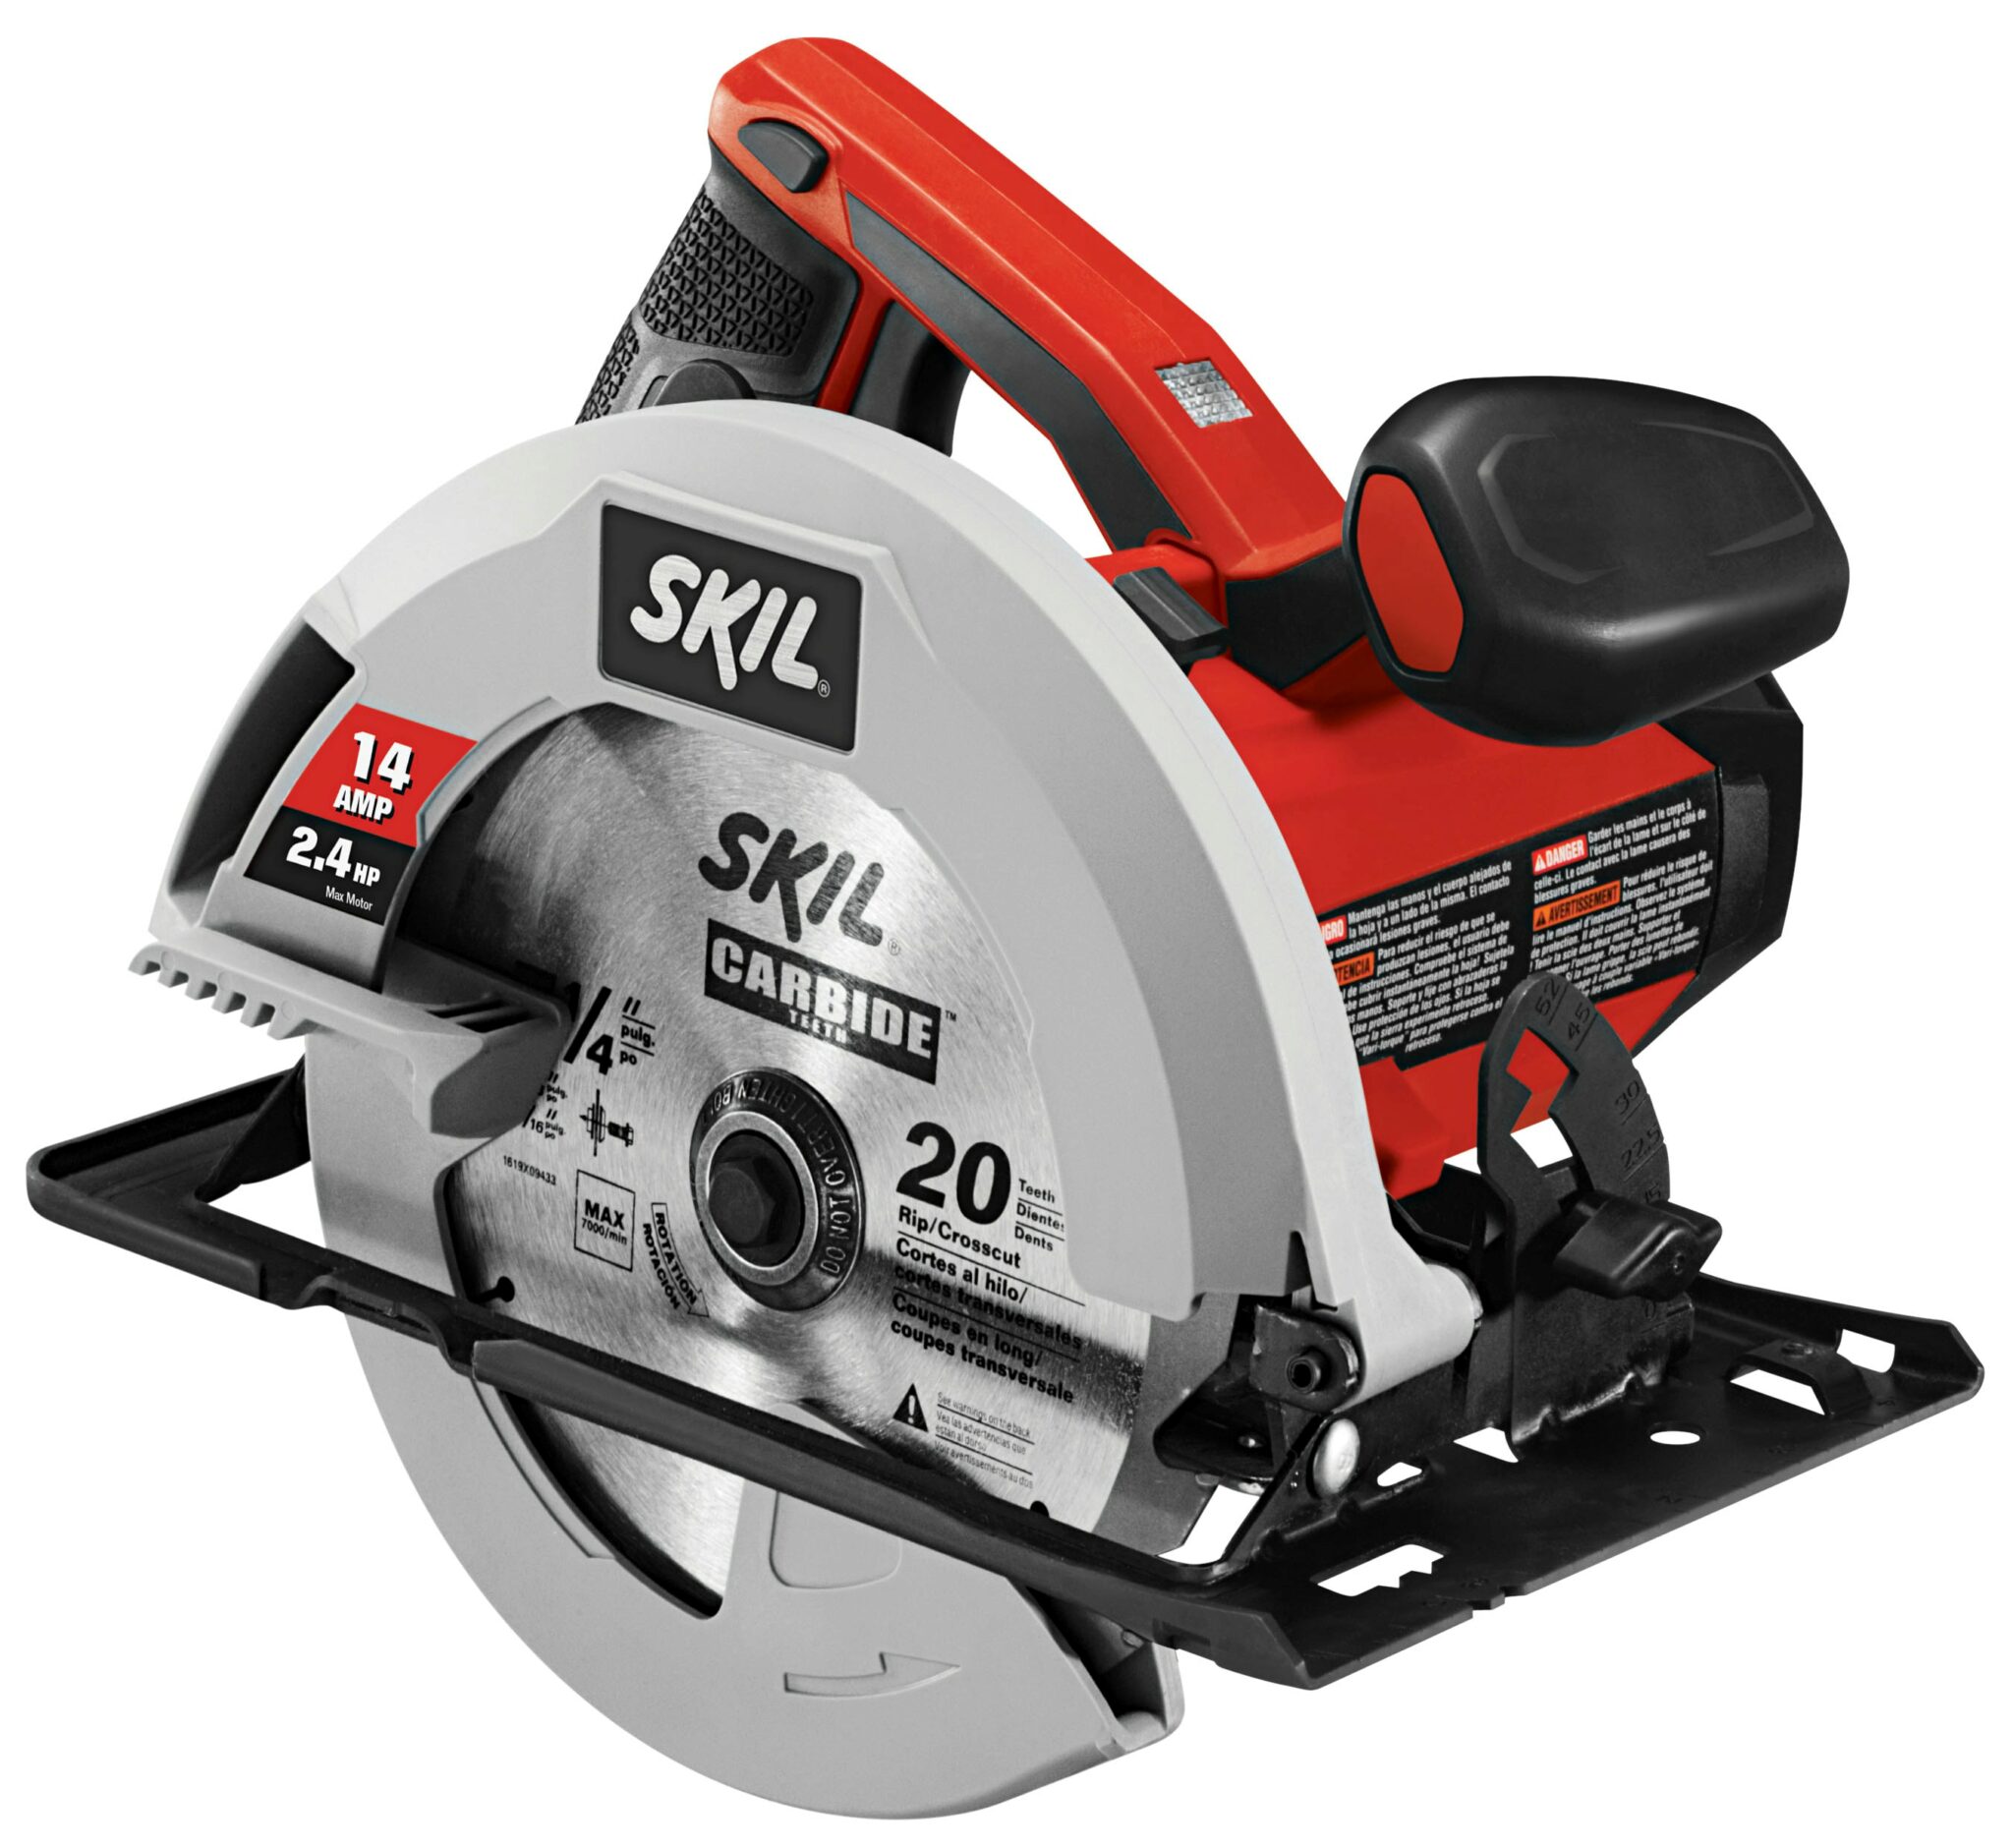 13 Amp Vs. 15 Amp Circular Saw Which Is Better